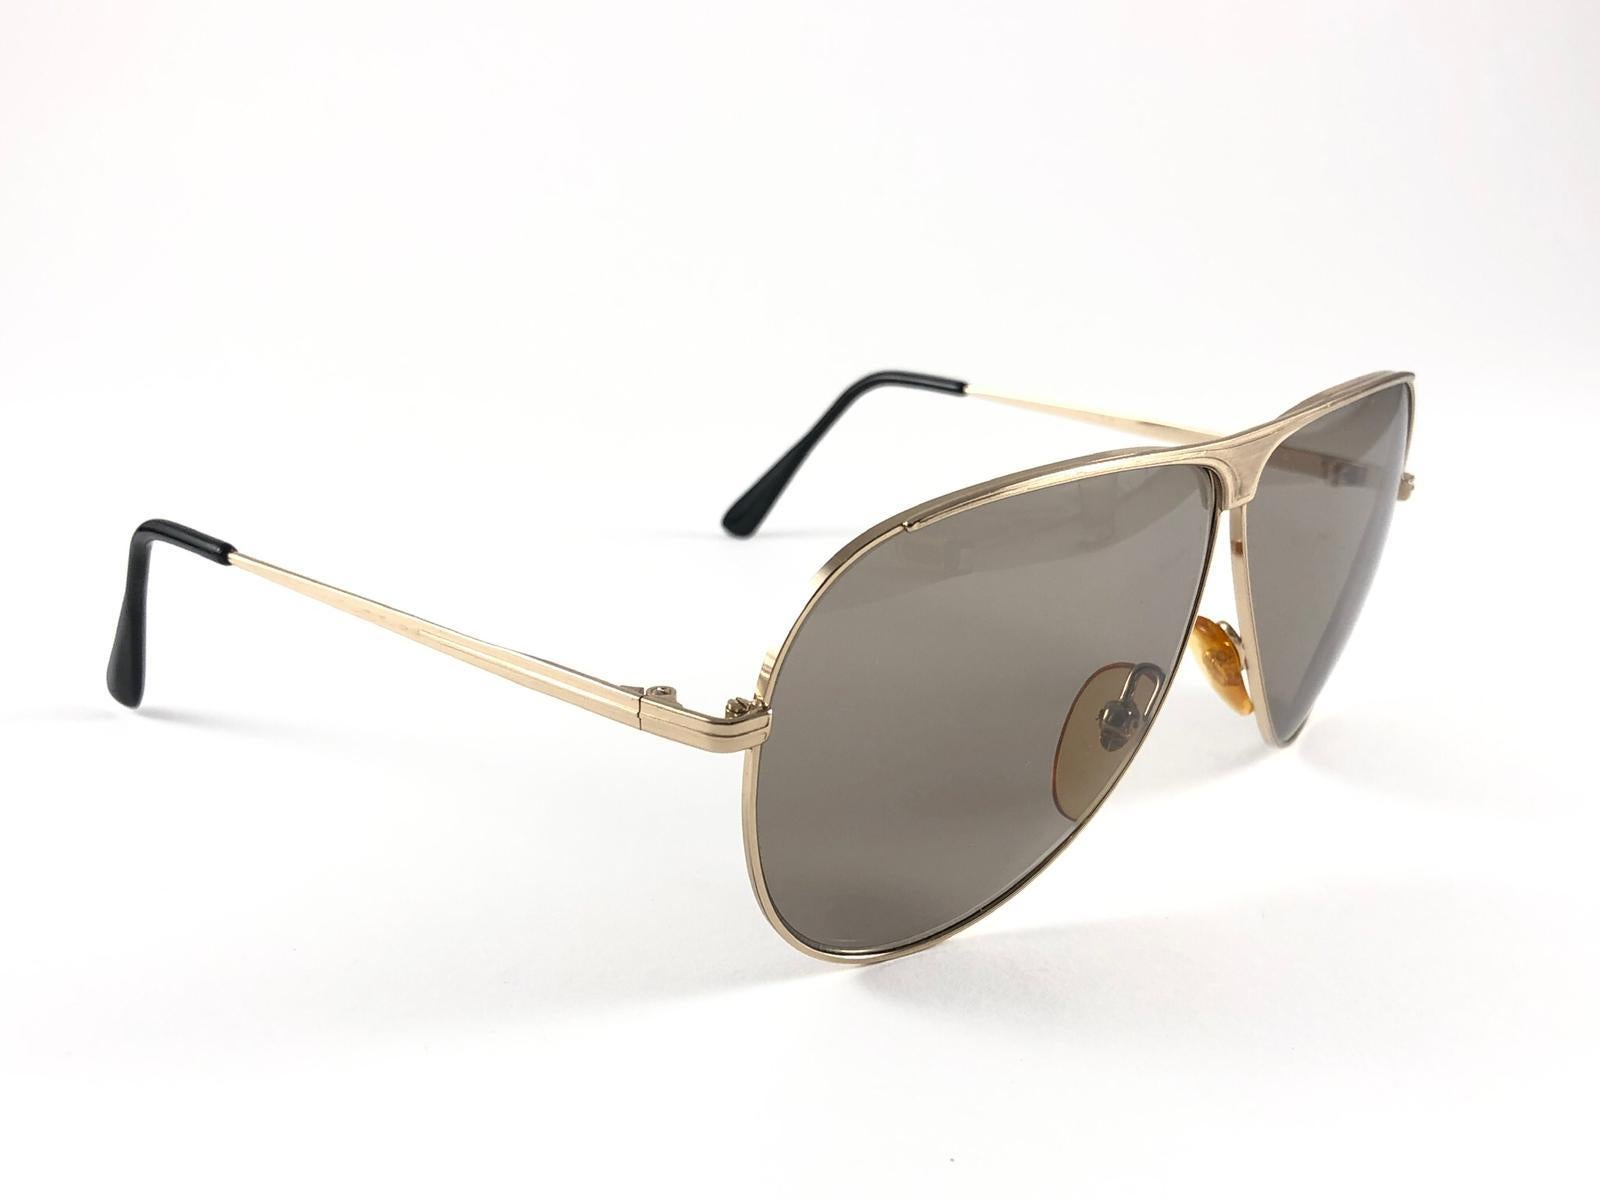 New Vintage Safilo, a balanced combination of Italian craftsmanship, design, functionality and striking aesthetics, this model showcases a Gold Frame holding a spotless green lenses.

New, never worn or displayed.
Made in Italy.

Measurements 